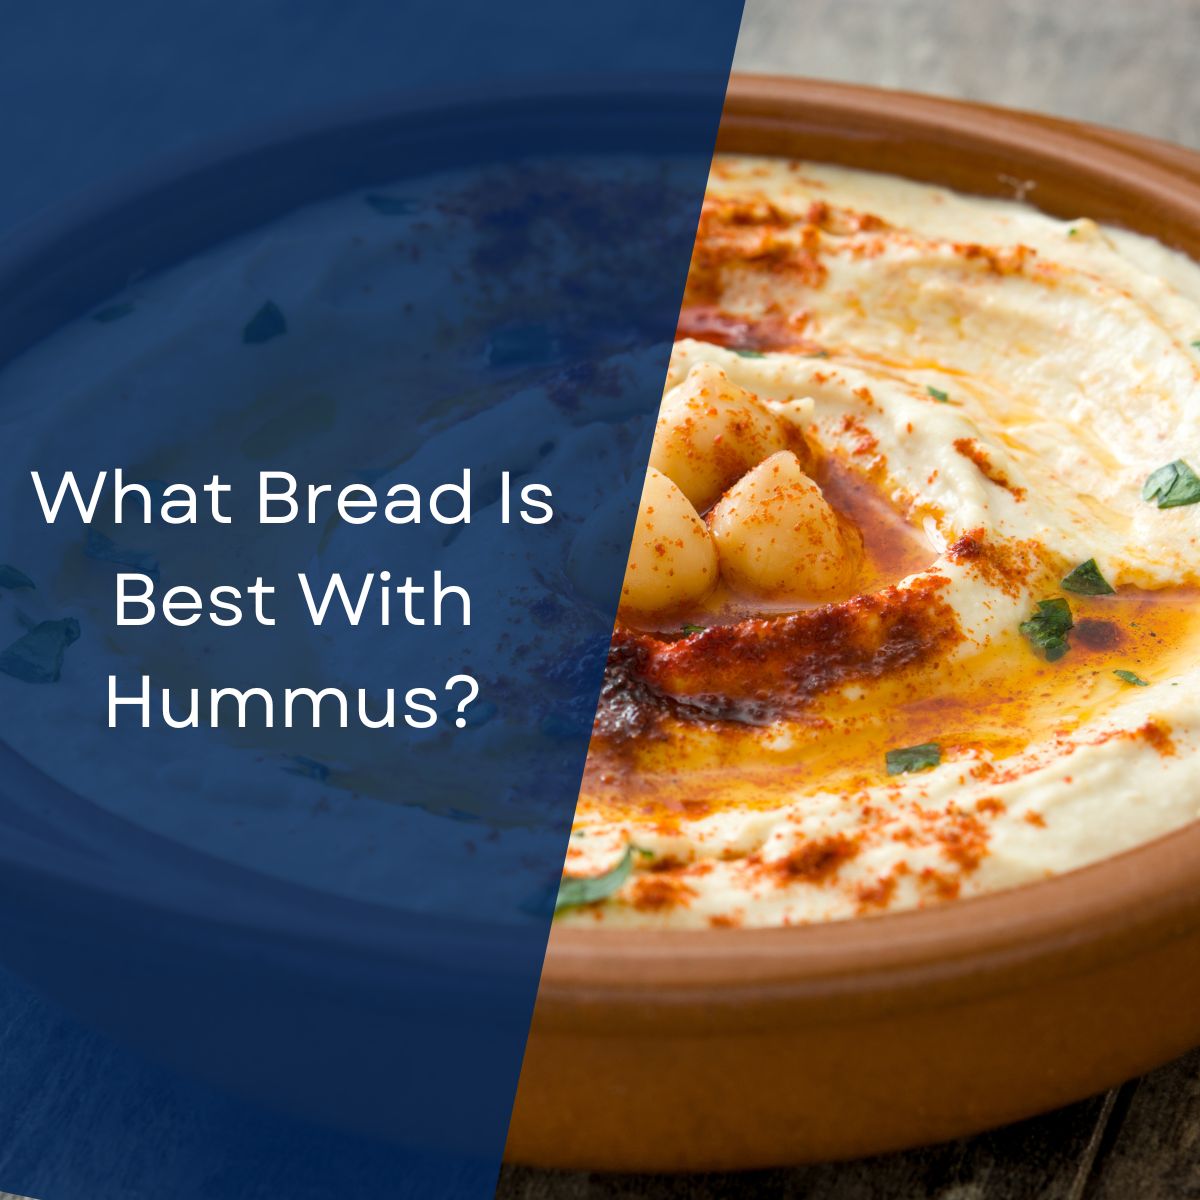 What Bread Is Best With Hummus?